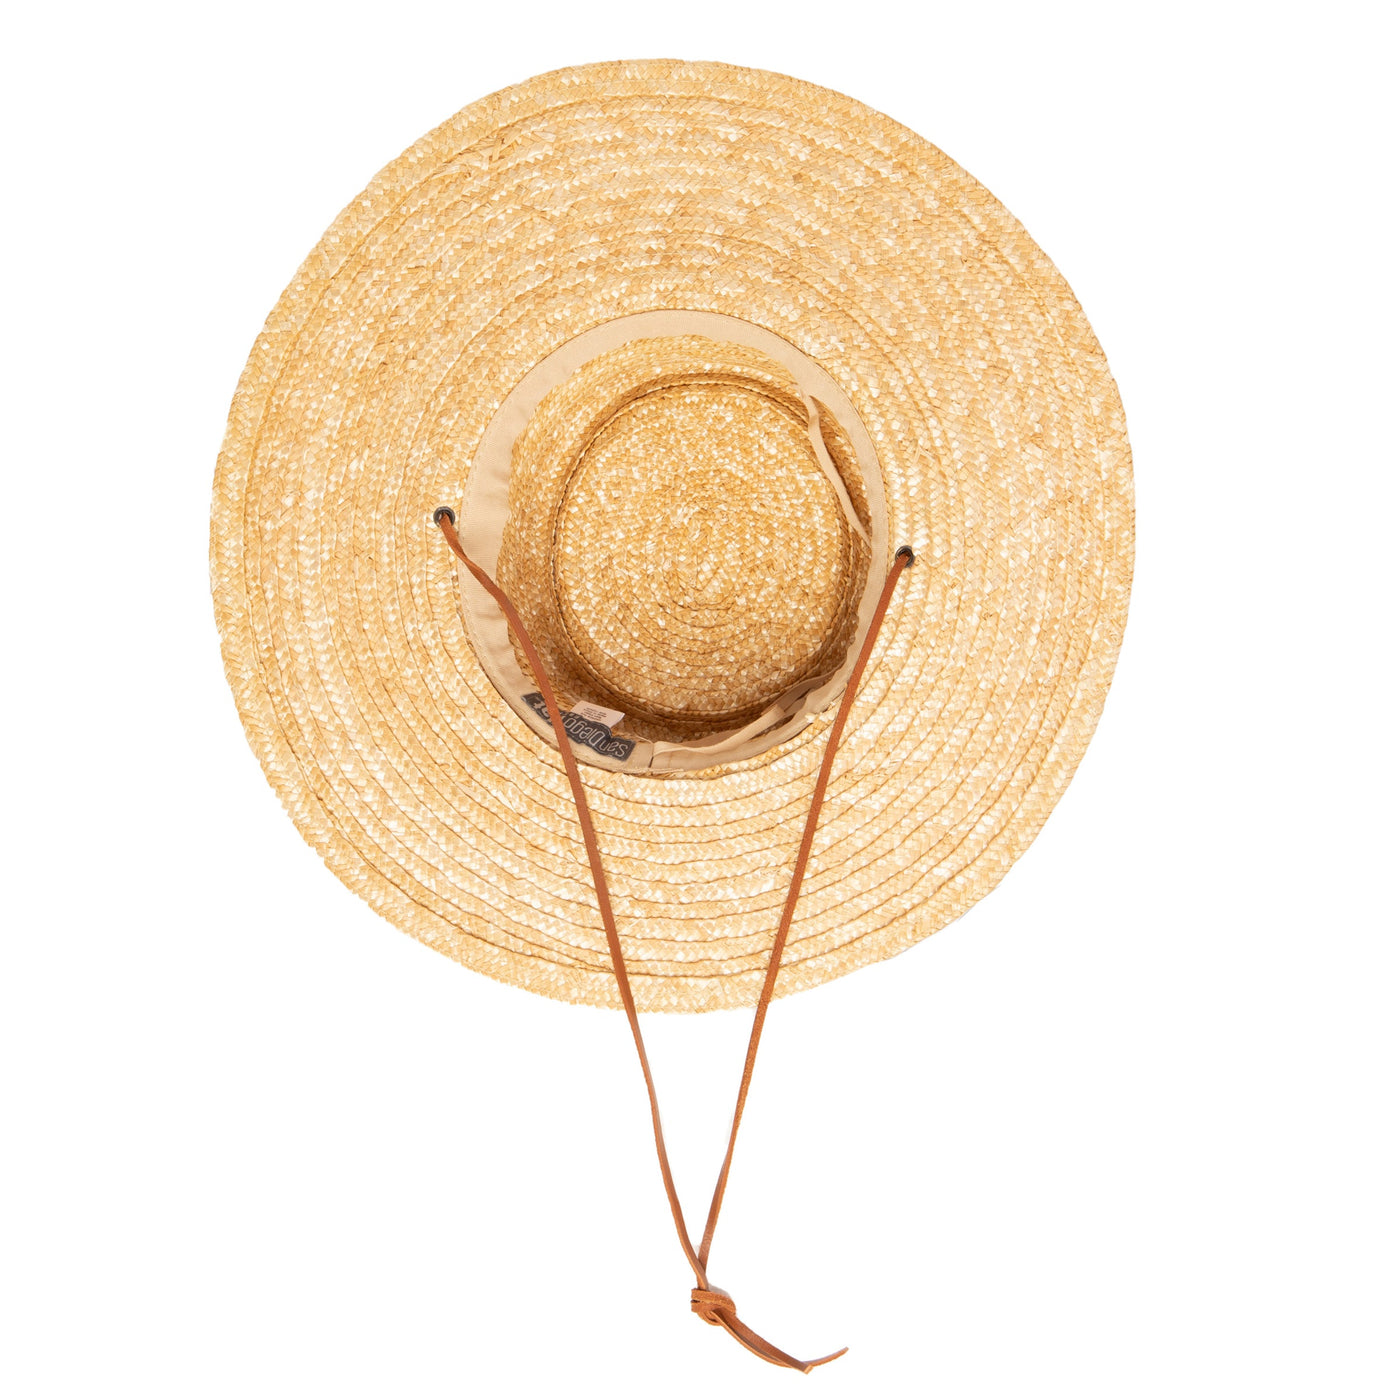 Honeydew - Women's Wheat Straw Hat With Leather Chin Cord